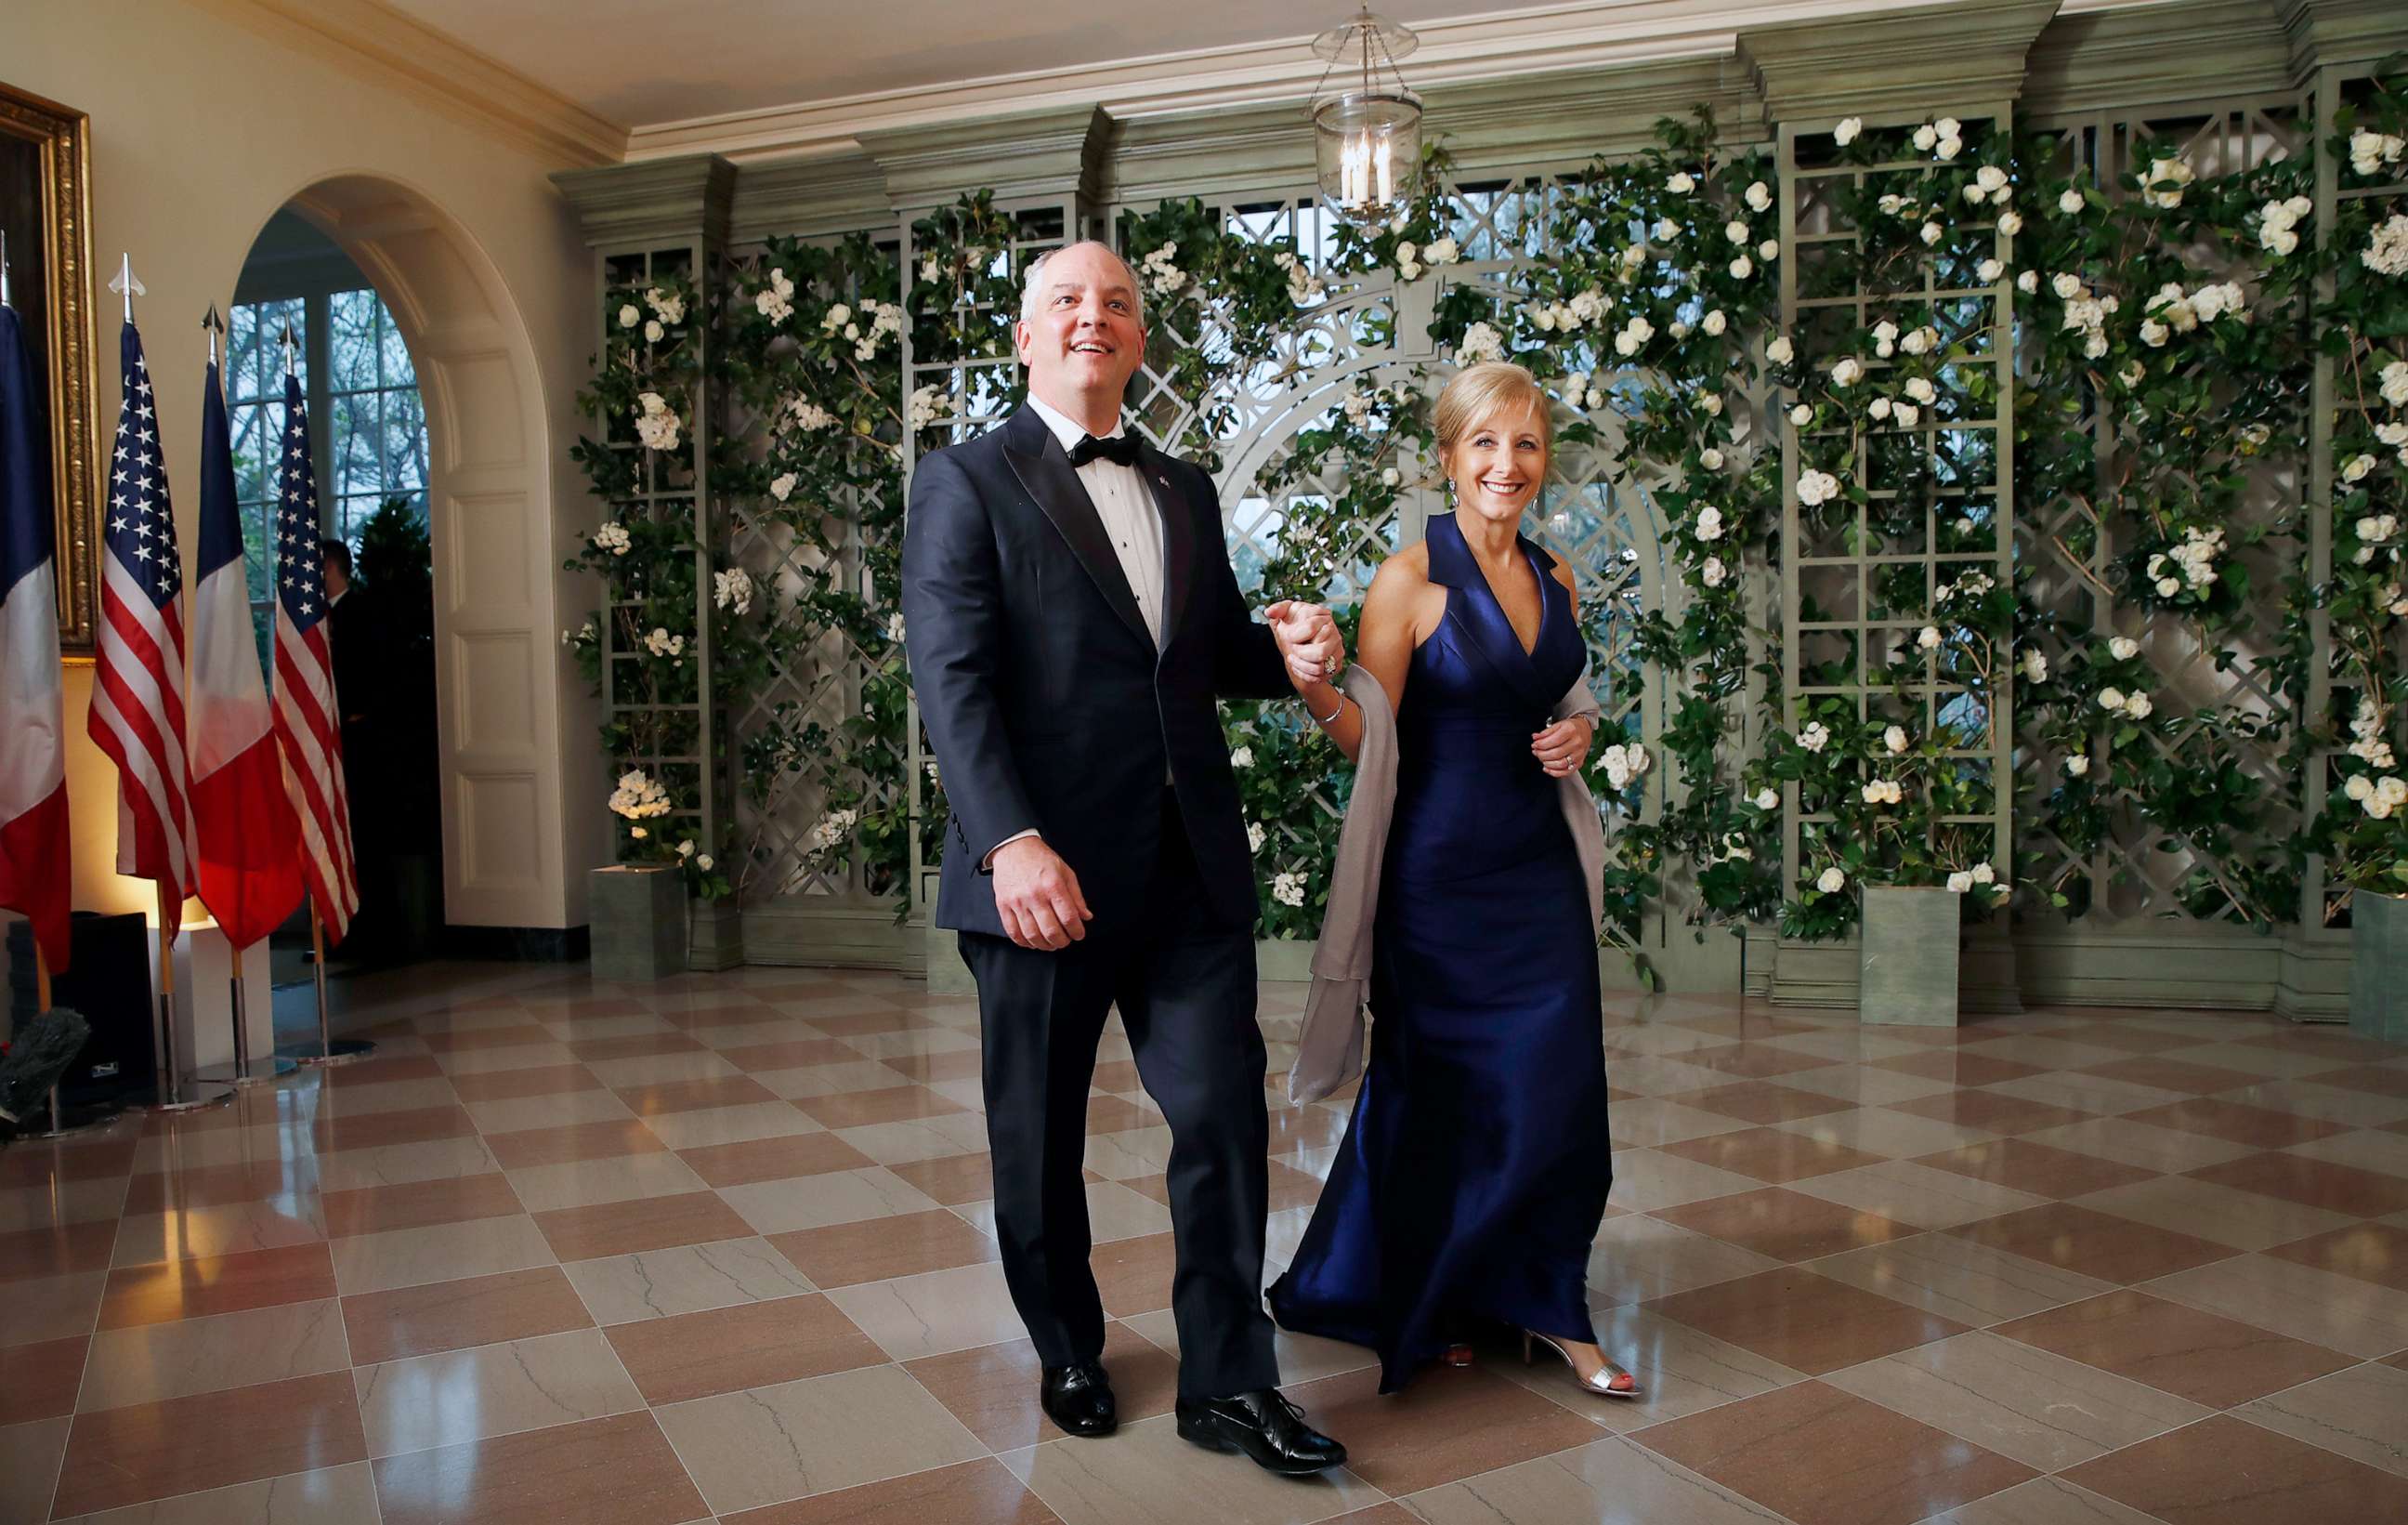 PHOTO: In this April 24, 2018 file photo Gov. John Bel Edwards with his wife Donna Edwards arrive for a State Dinner with French President Emmanuel Macron and President Donald Trump at the White House in Washington.